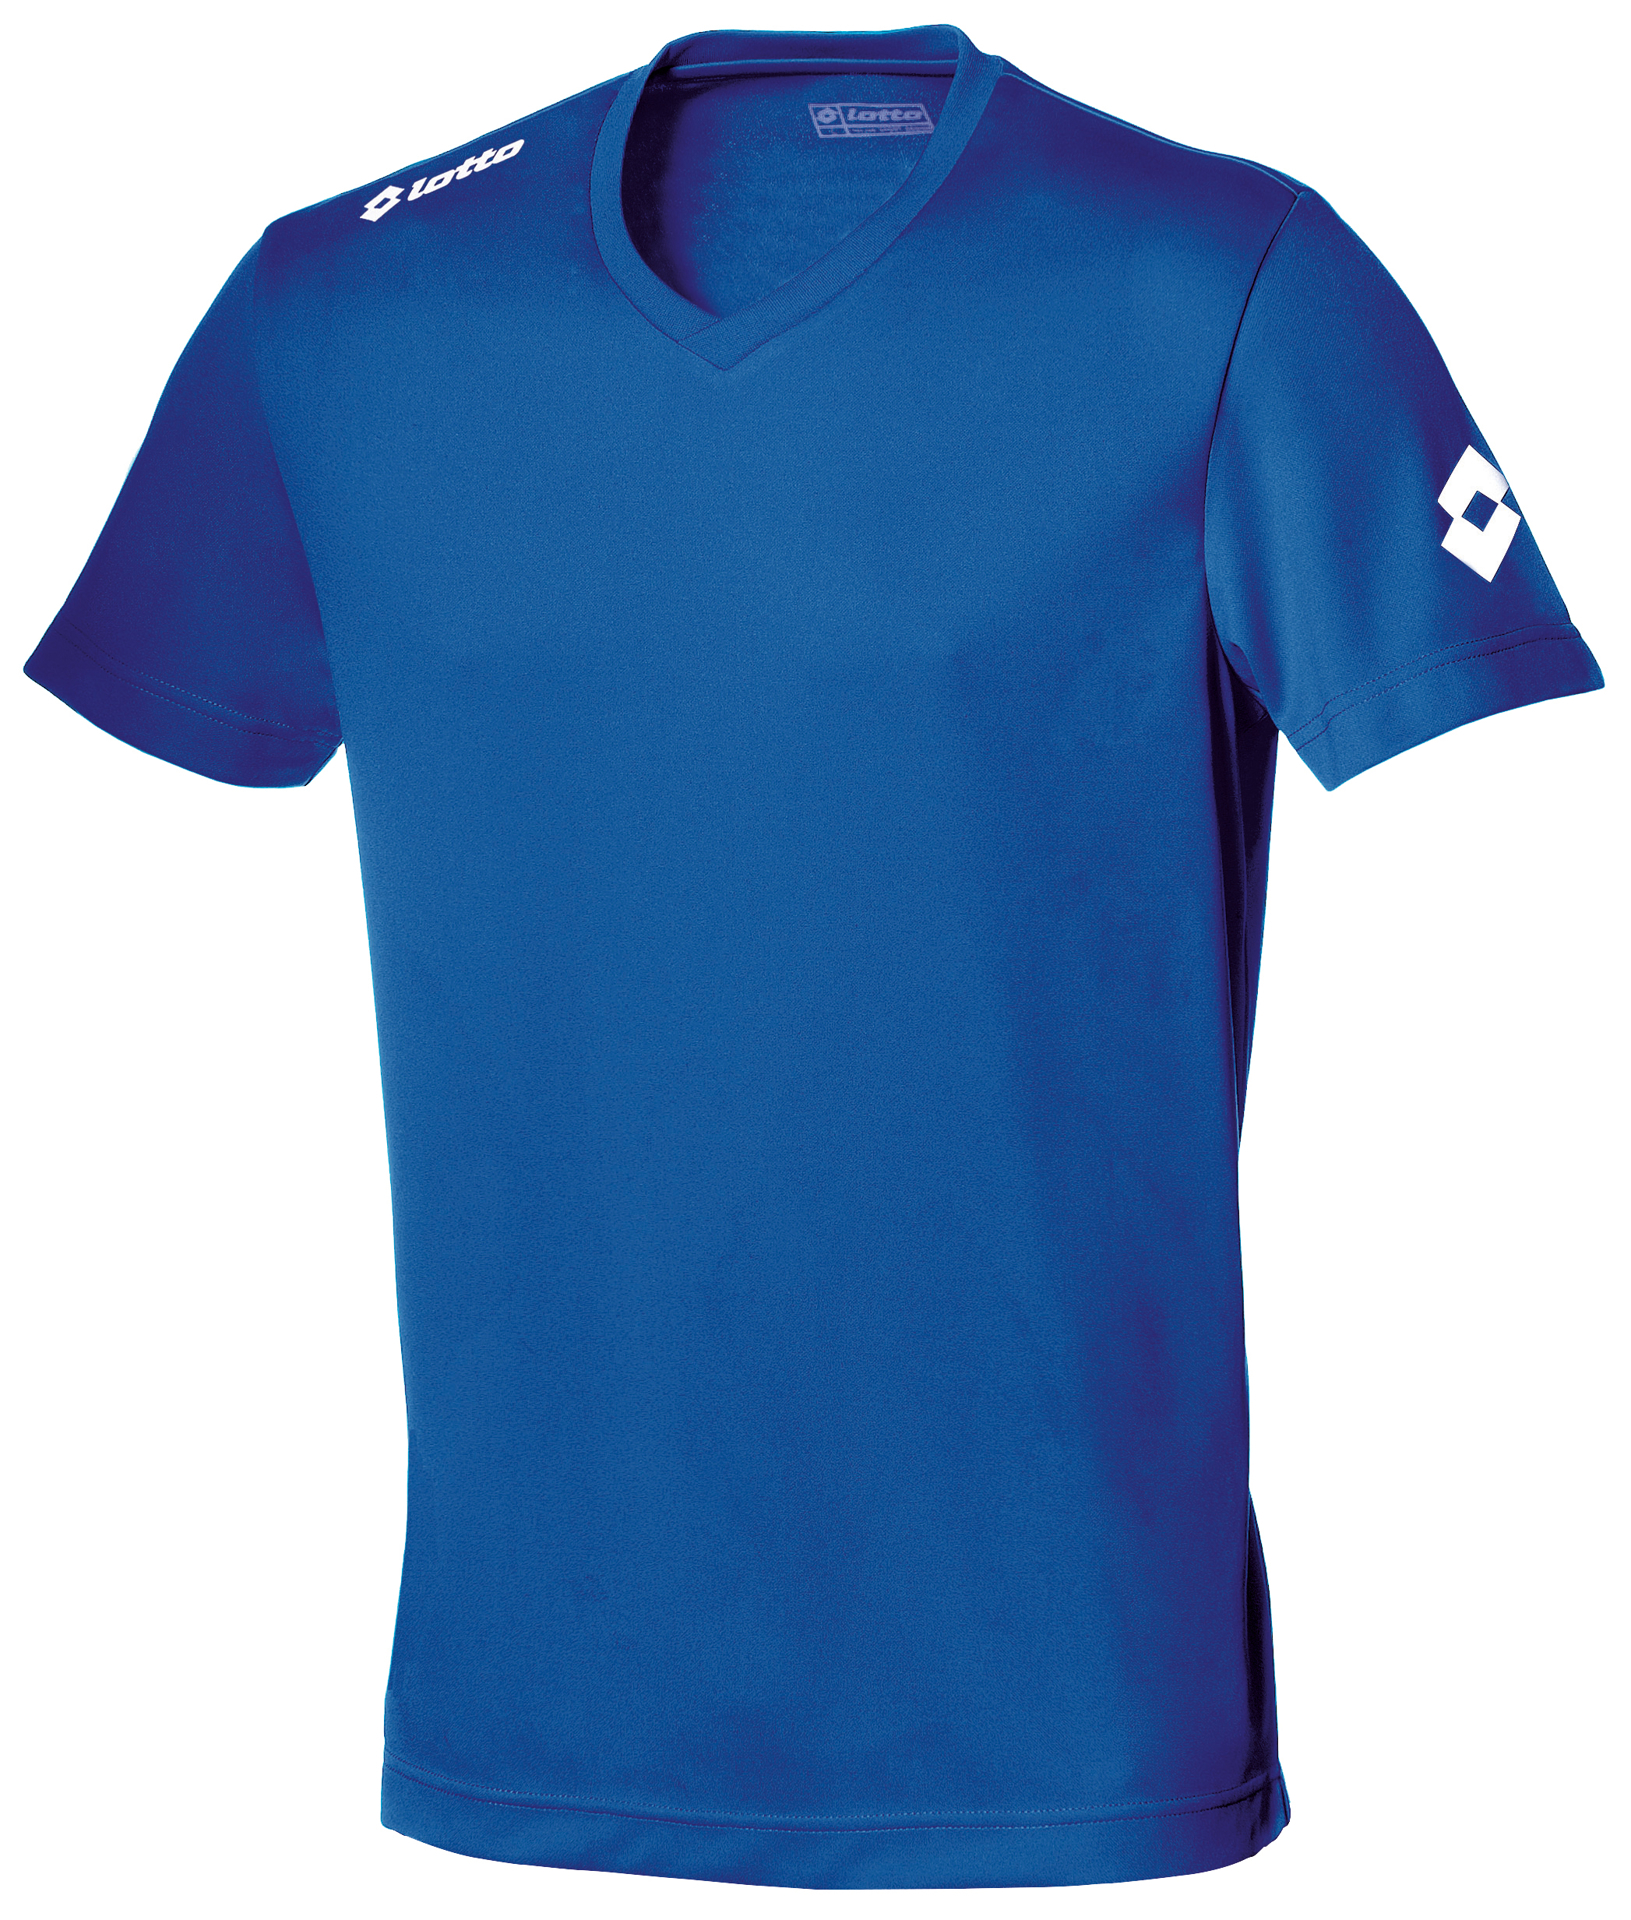 Short sleeve Jersey Team EVO in blue with Taped V neck and 1 colour print logo on right shoulder and left arm sleeve